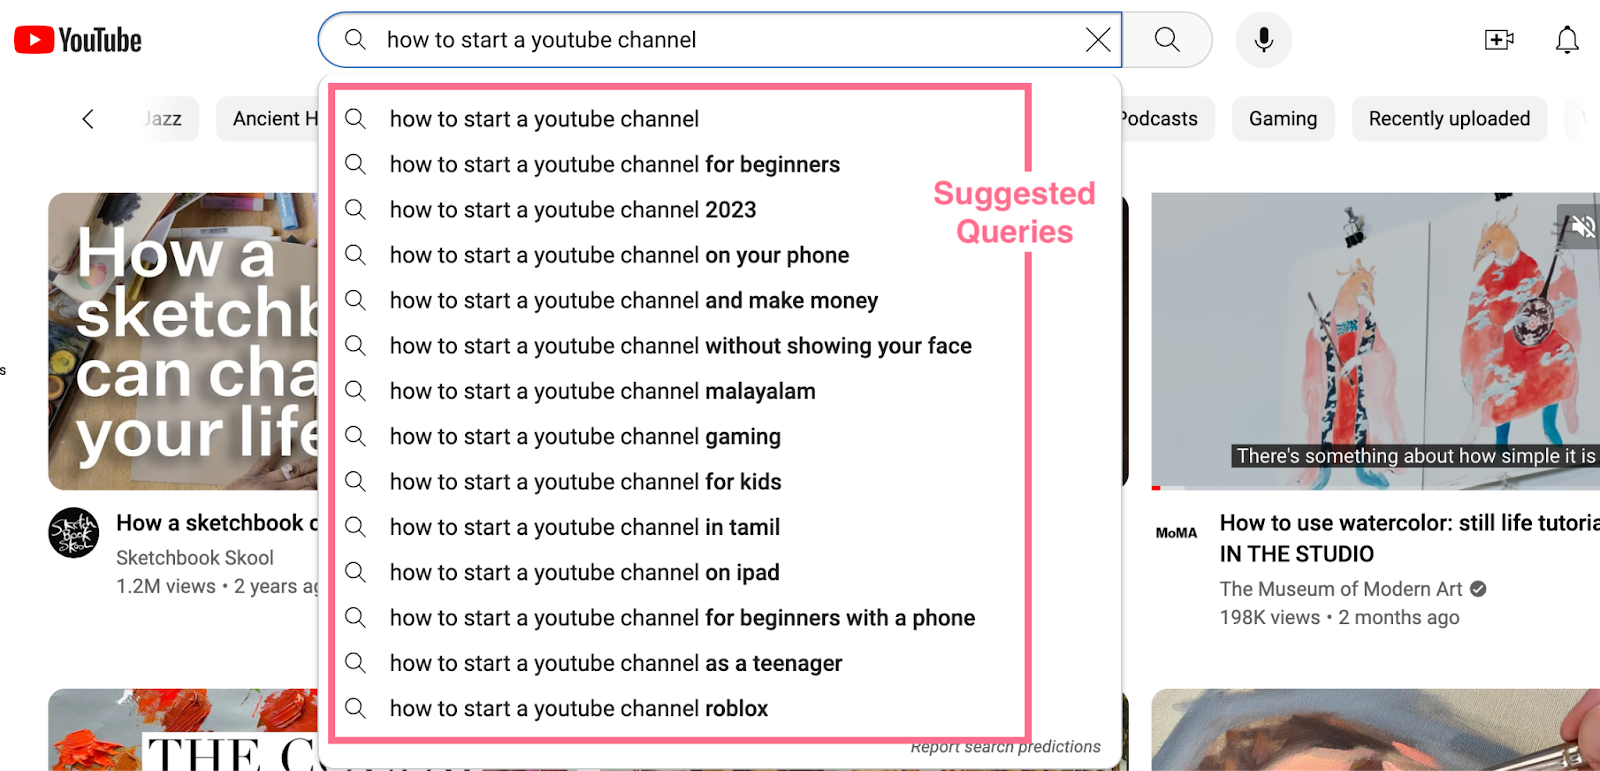 Suggested queries for “How to start a youtube channel” in YouTube search